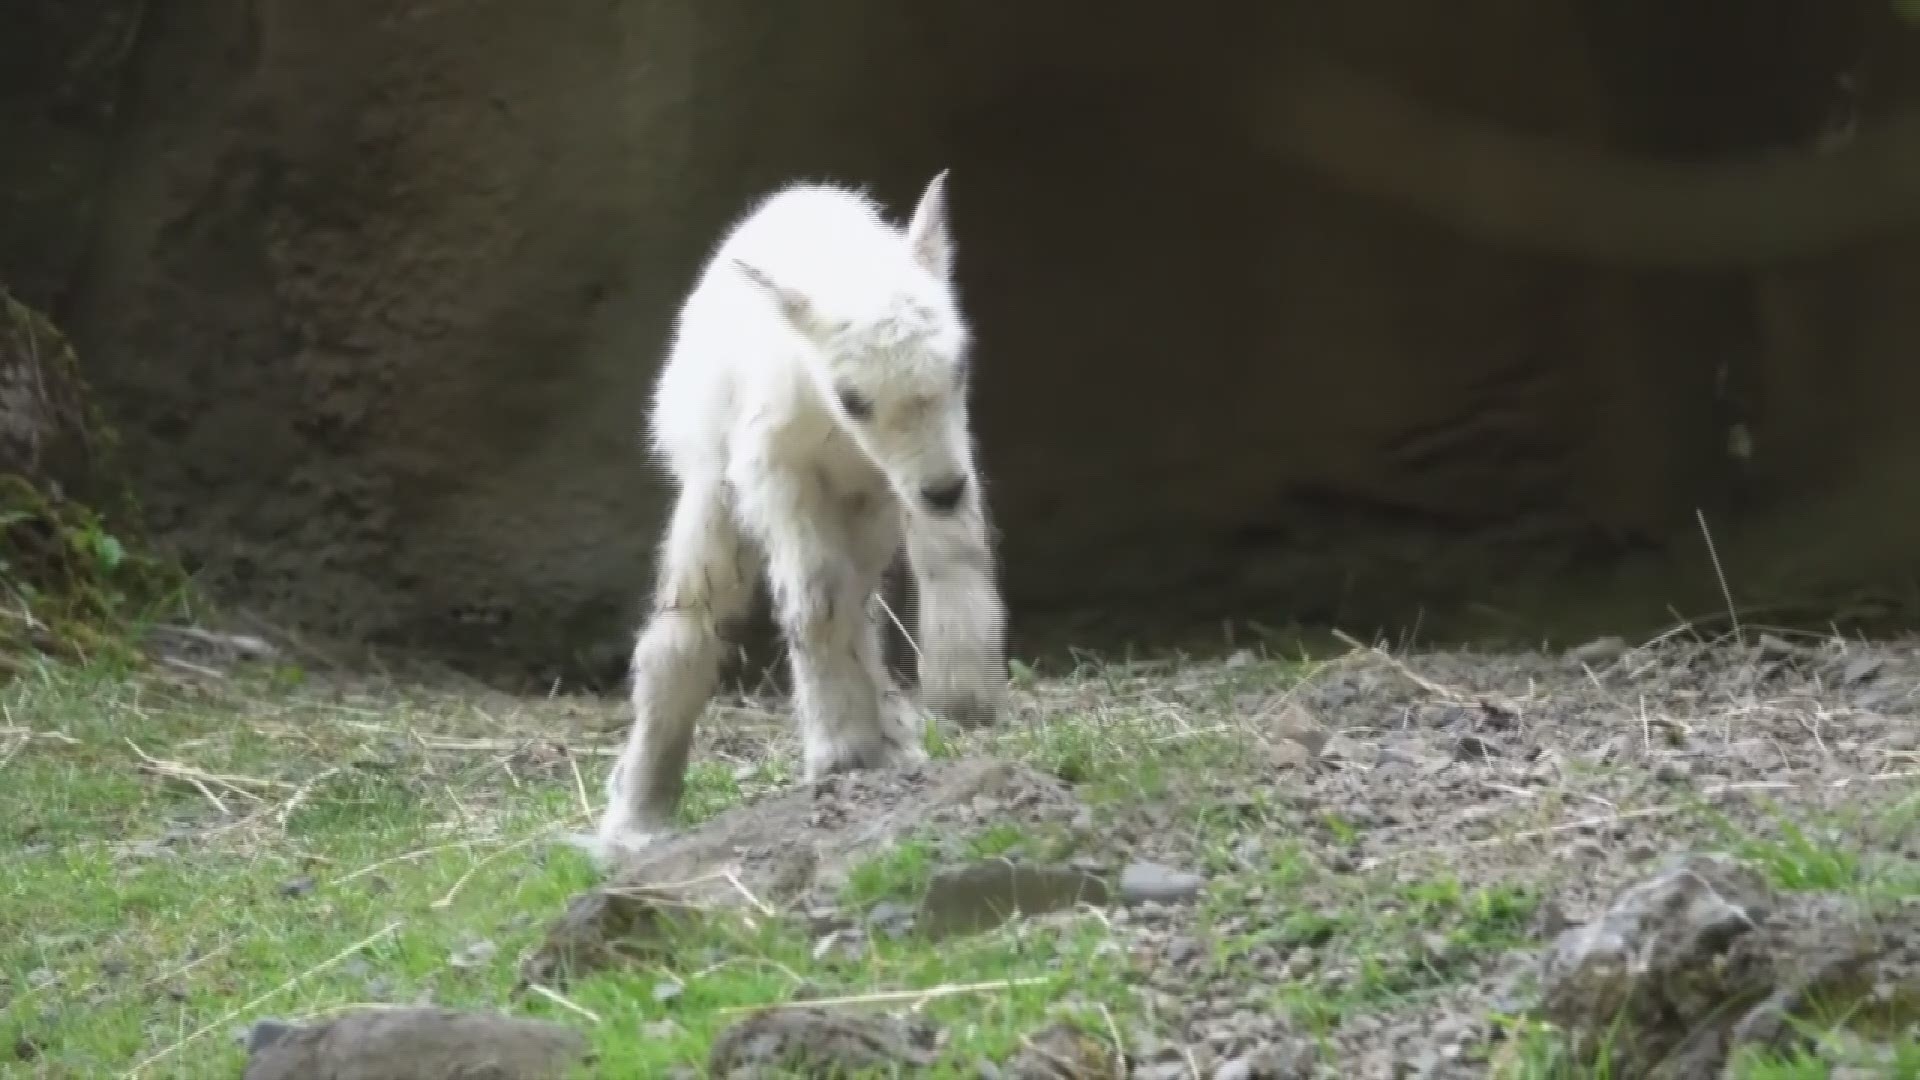 This adorable video shows a baby mountain goat, at just 8 hours old, exploring its new habitat at the Oregon Zoo. It was the second mountain goat born at the zoo in less than a month.